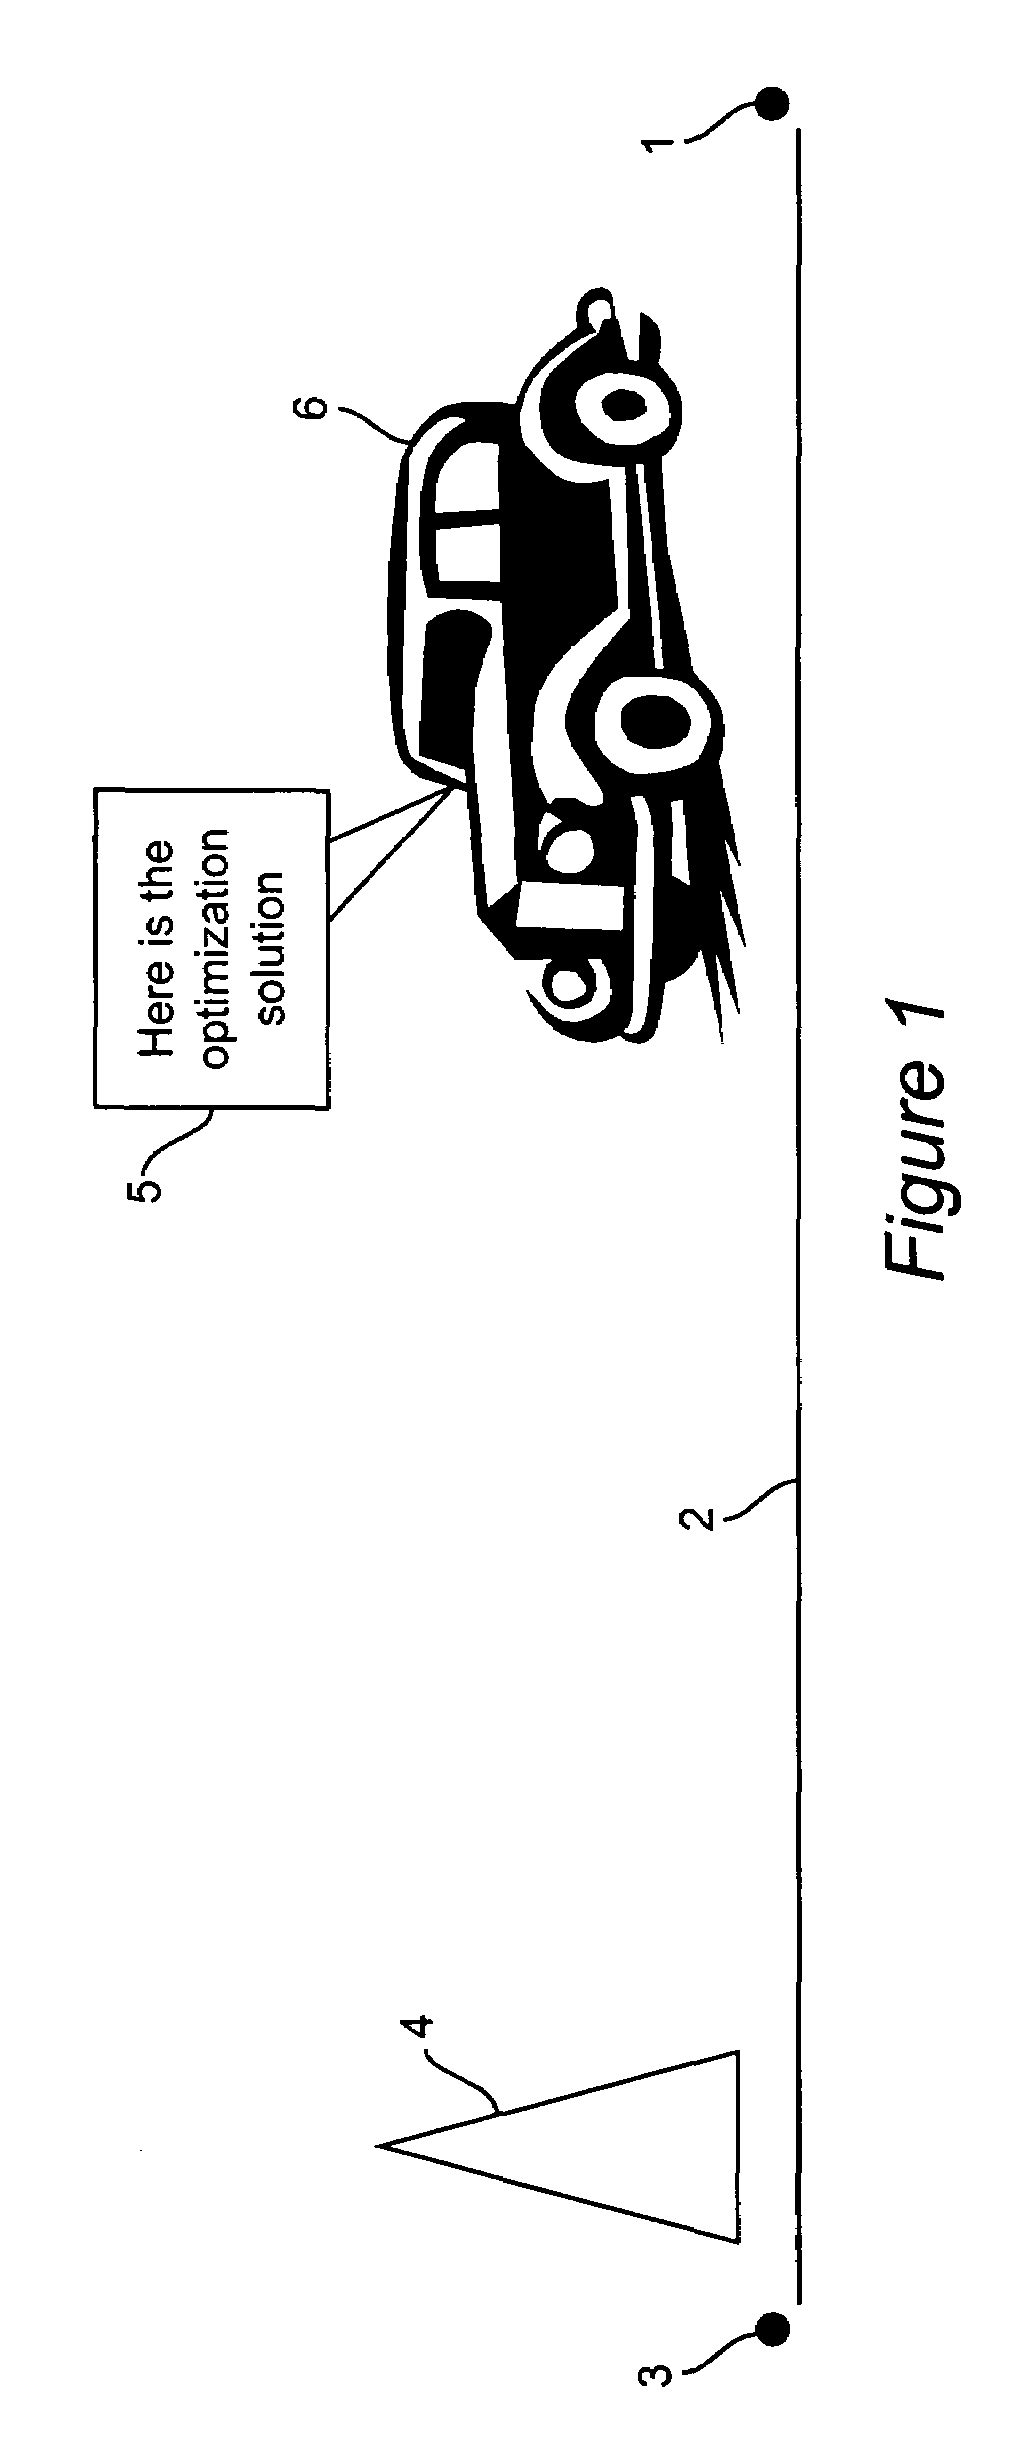 System and method for minimizing energy consumption in hybrid vehicles